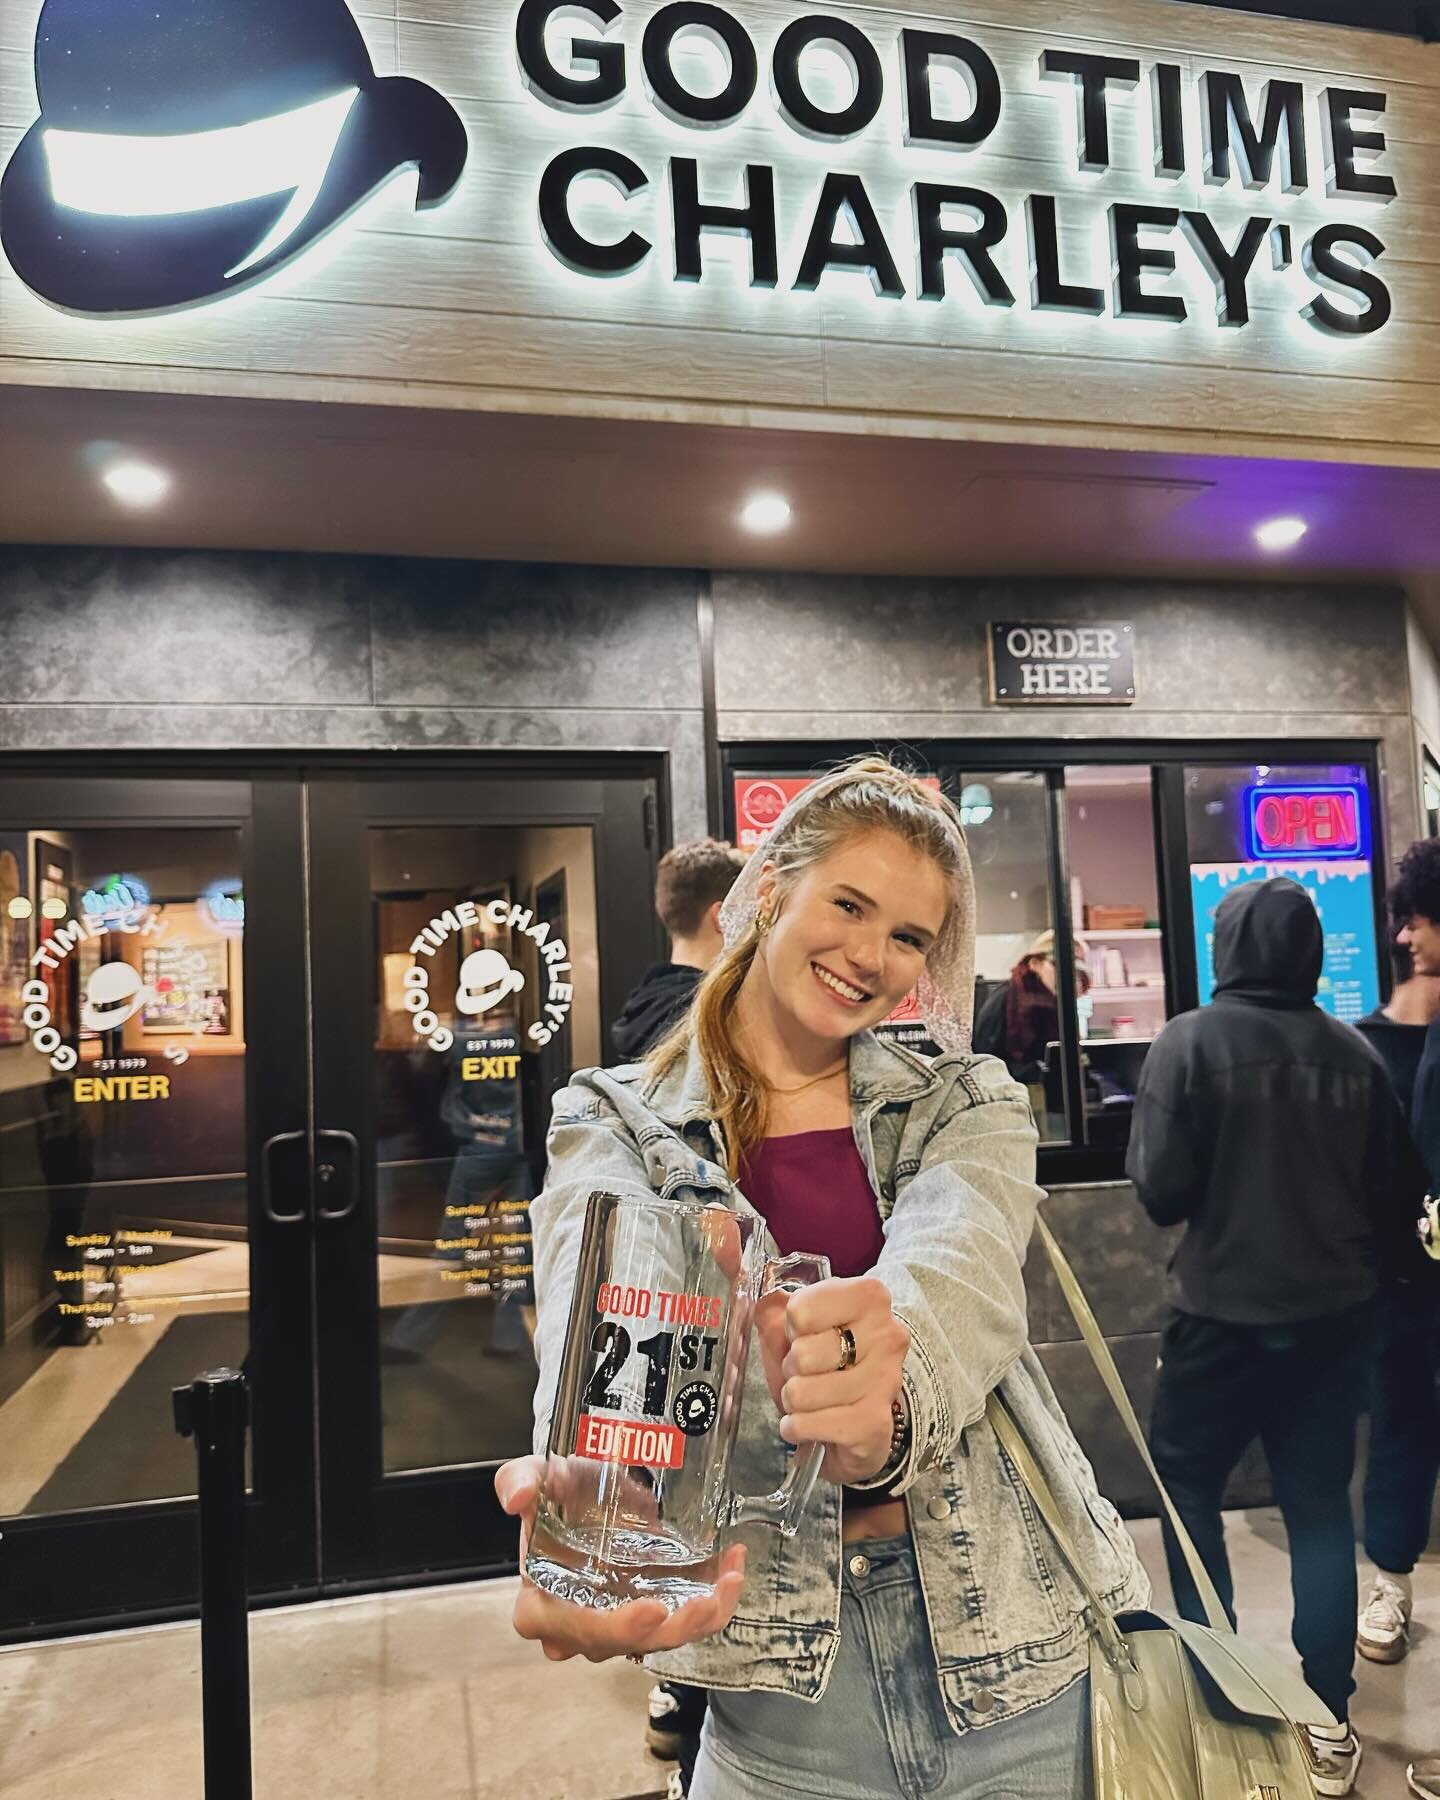 Happy 21st Birtbday to Julia! Thanks for celebrating with us 🎉

Do you or someone you know have a 21st Birthday coming up? Come out to Charley&rsquo;s on your special day to receive a FREE limited edition 21st Bday Mug 🍻